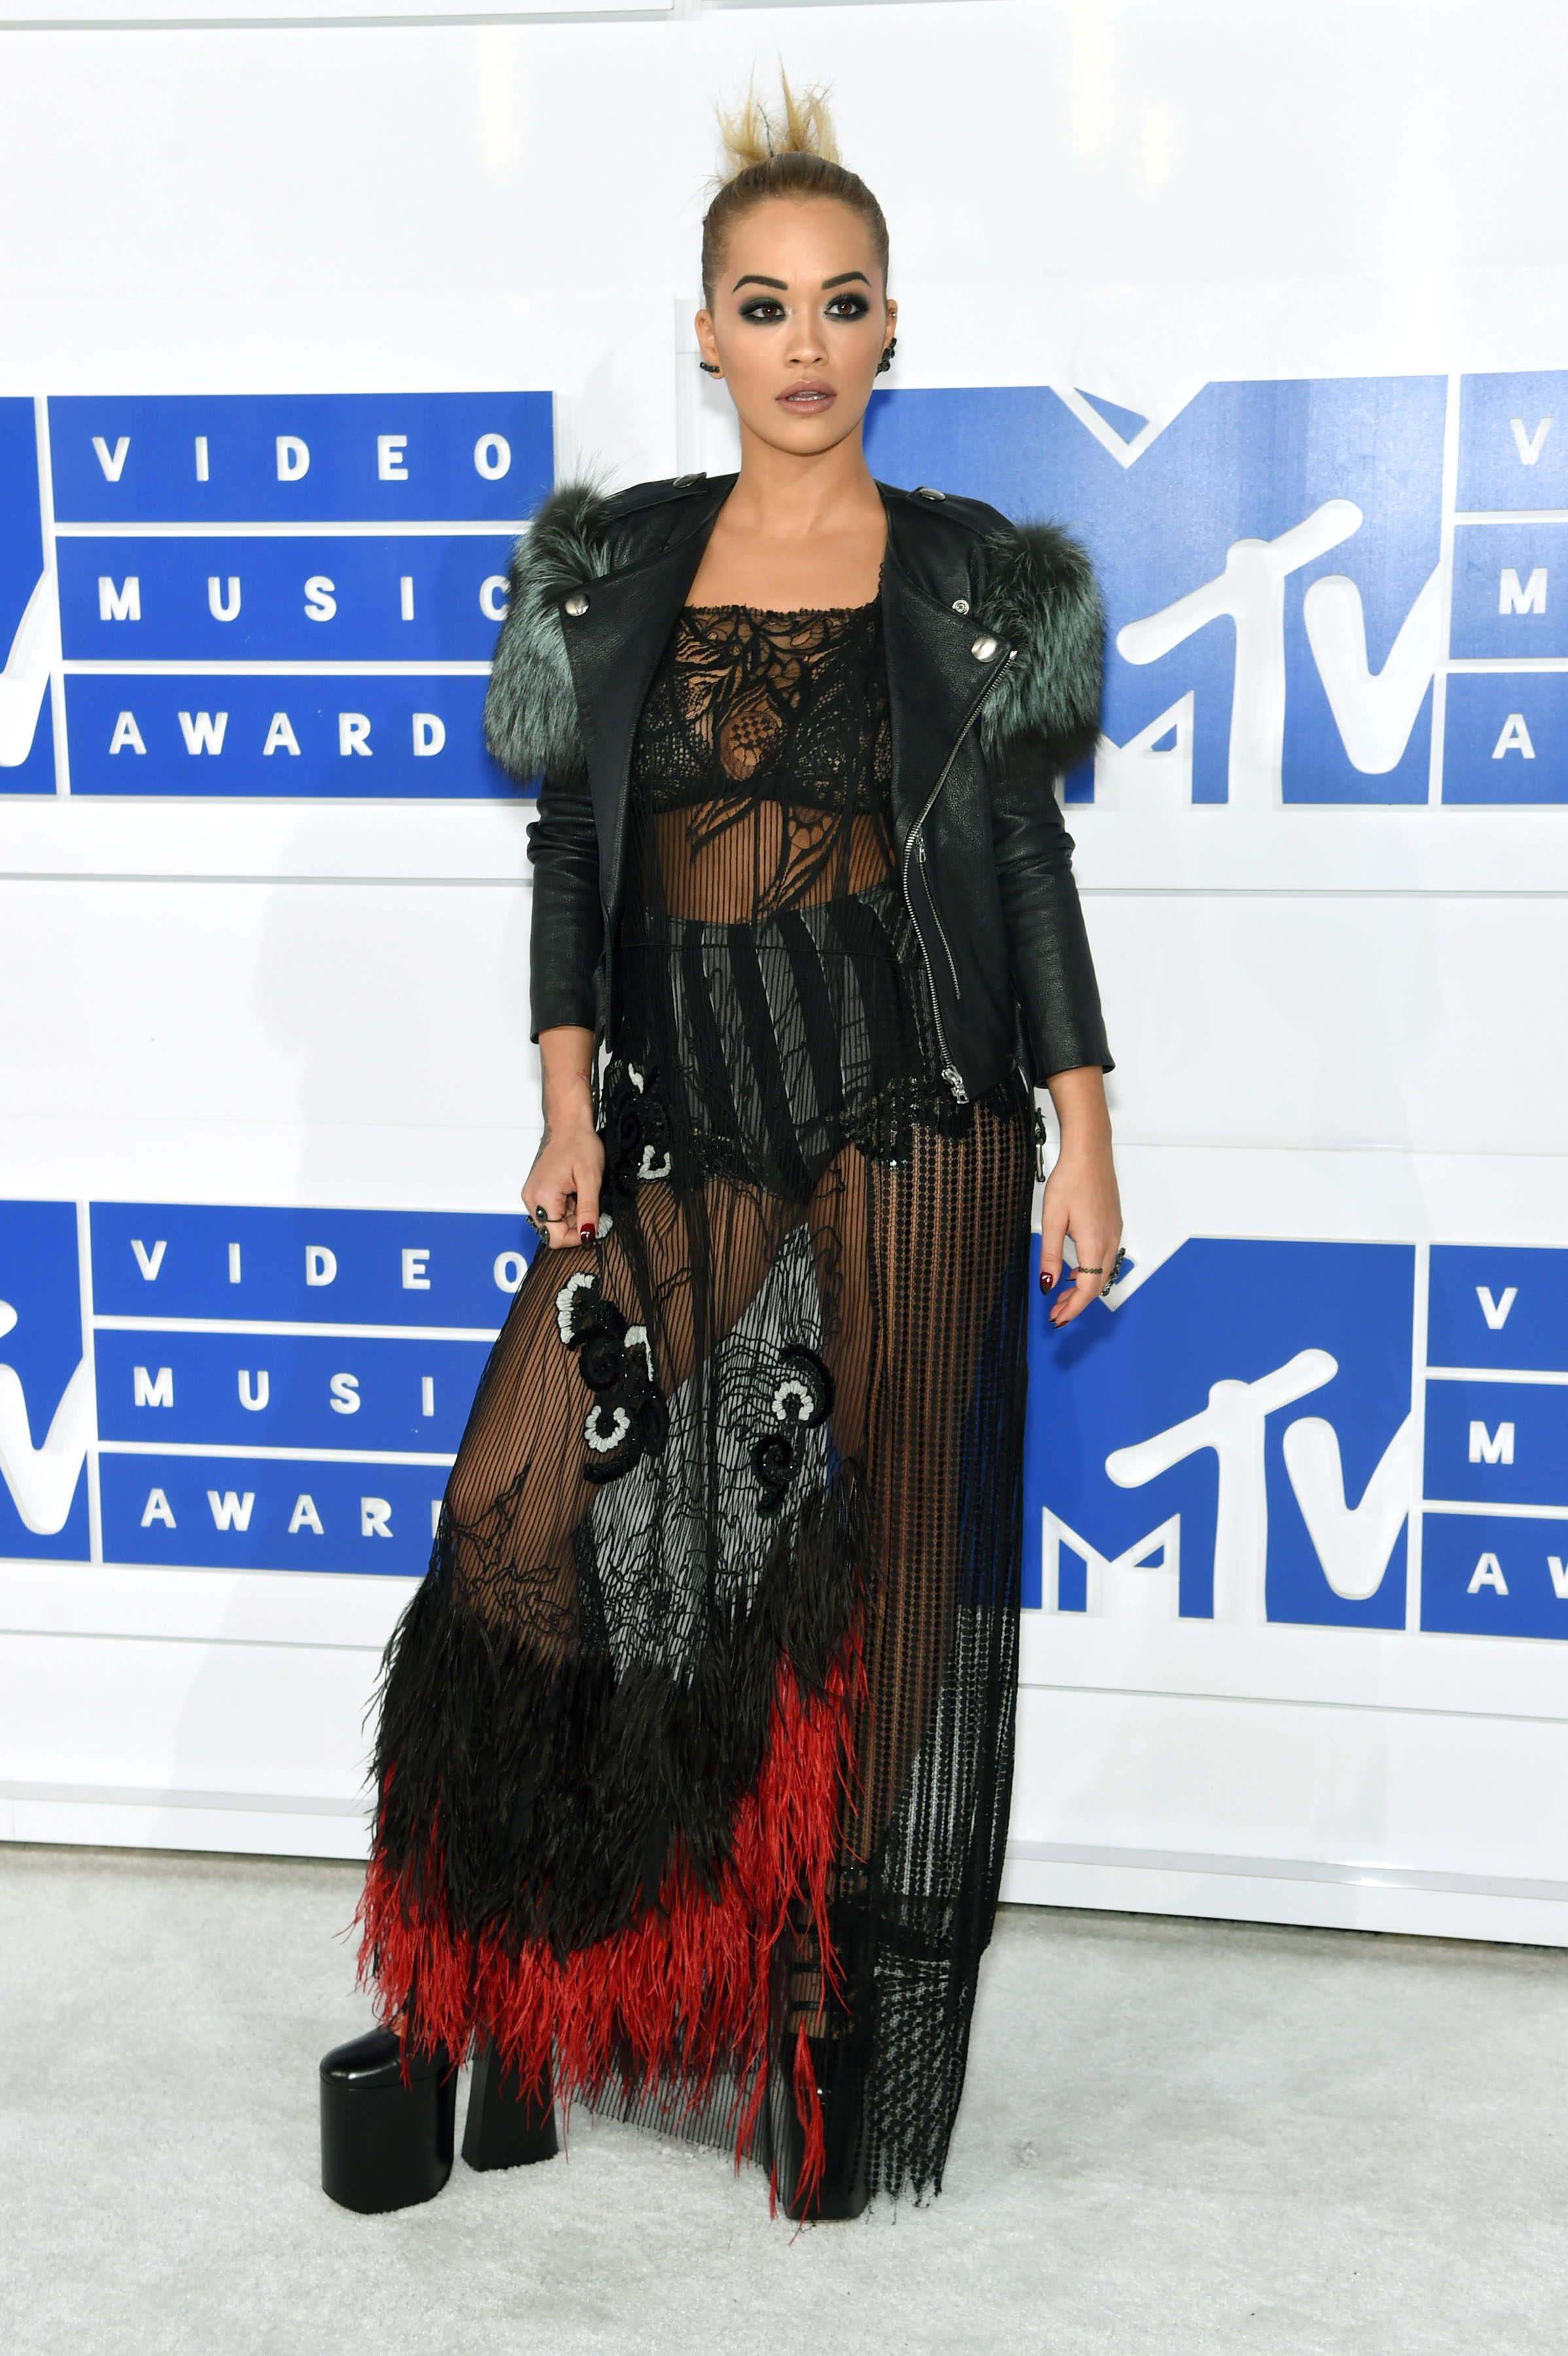 Rita Ora attends the 2016 MTV Video Music Awards at Madison Square Garden on Aug. 28, 2016 in New York City.